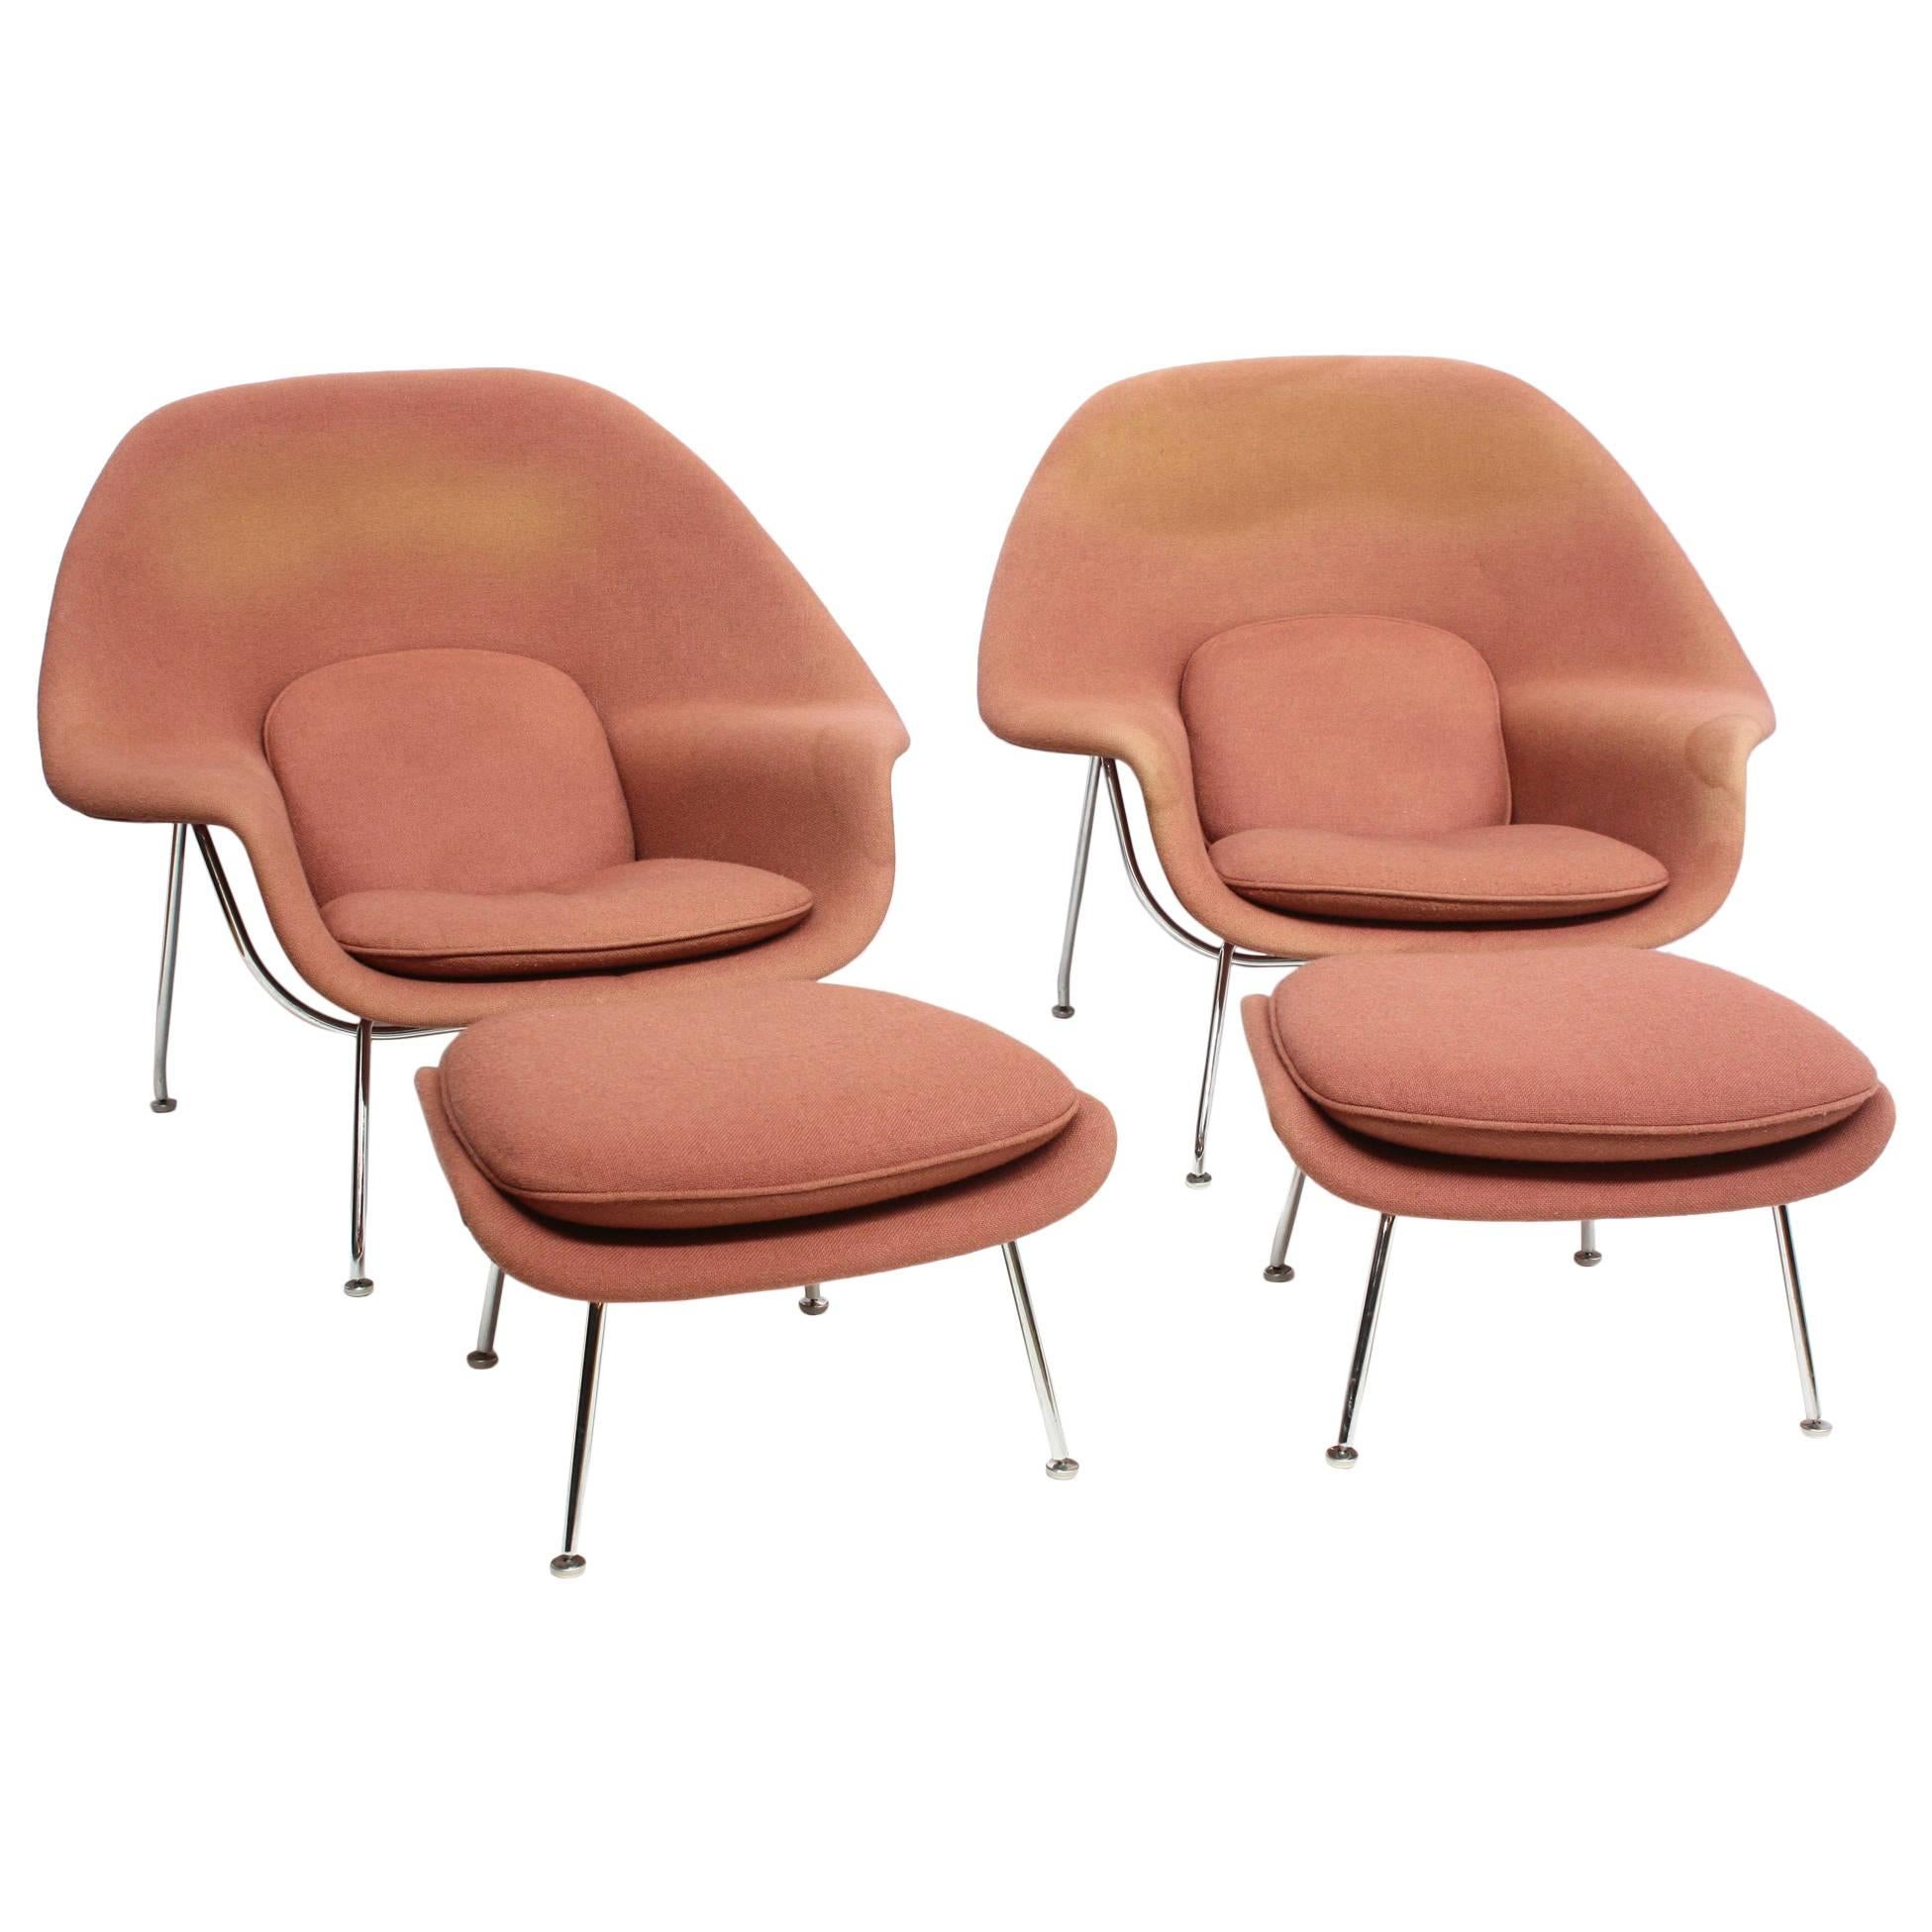 Pair of Eero Saarinen Womb Chairs and Ottomans for Knoll